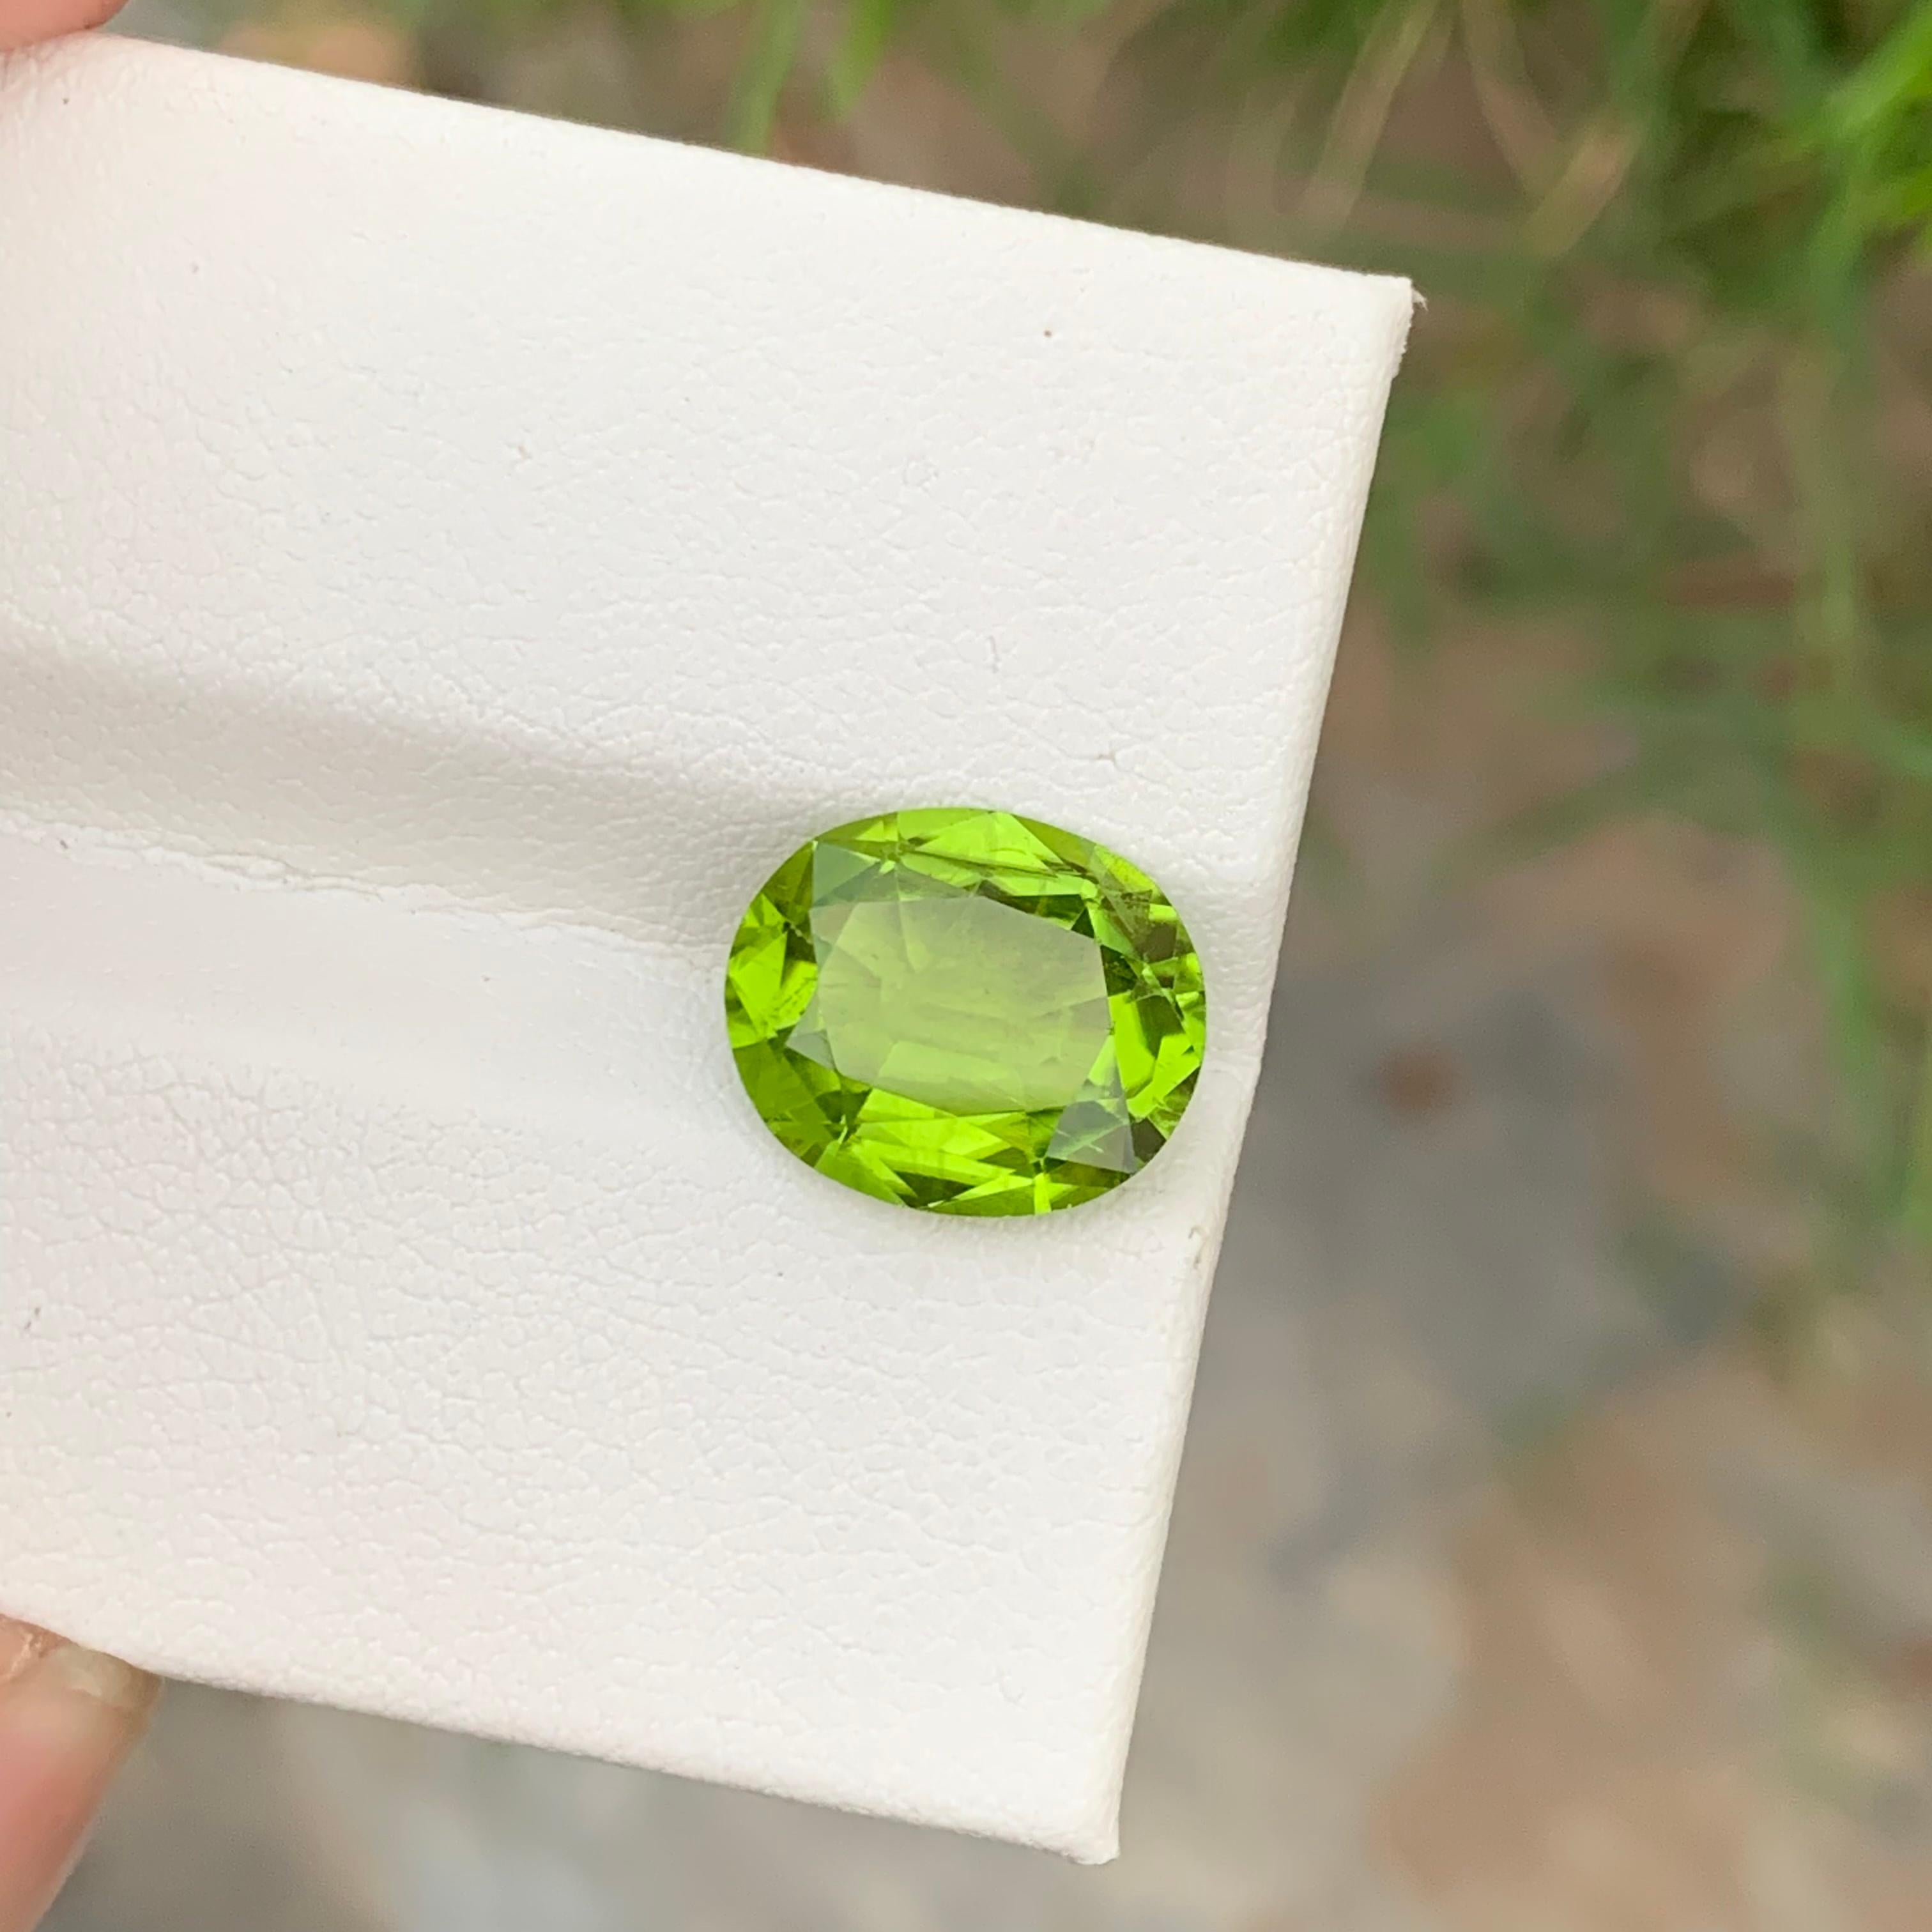 5.35 Carats Natural Apple Green Loose Peridot Gem From Suppart Valley Mine For Sale 2